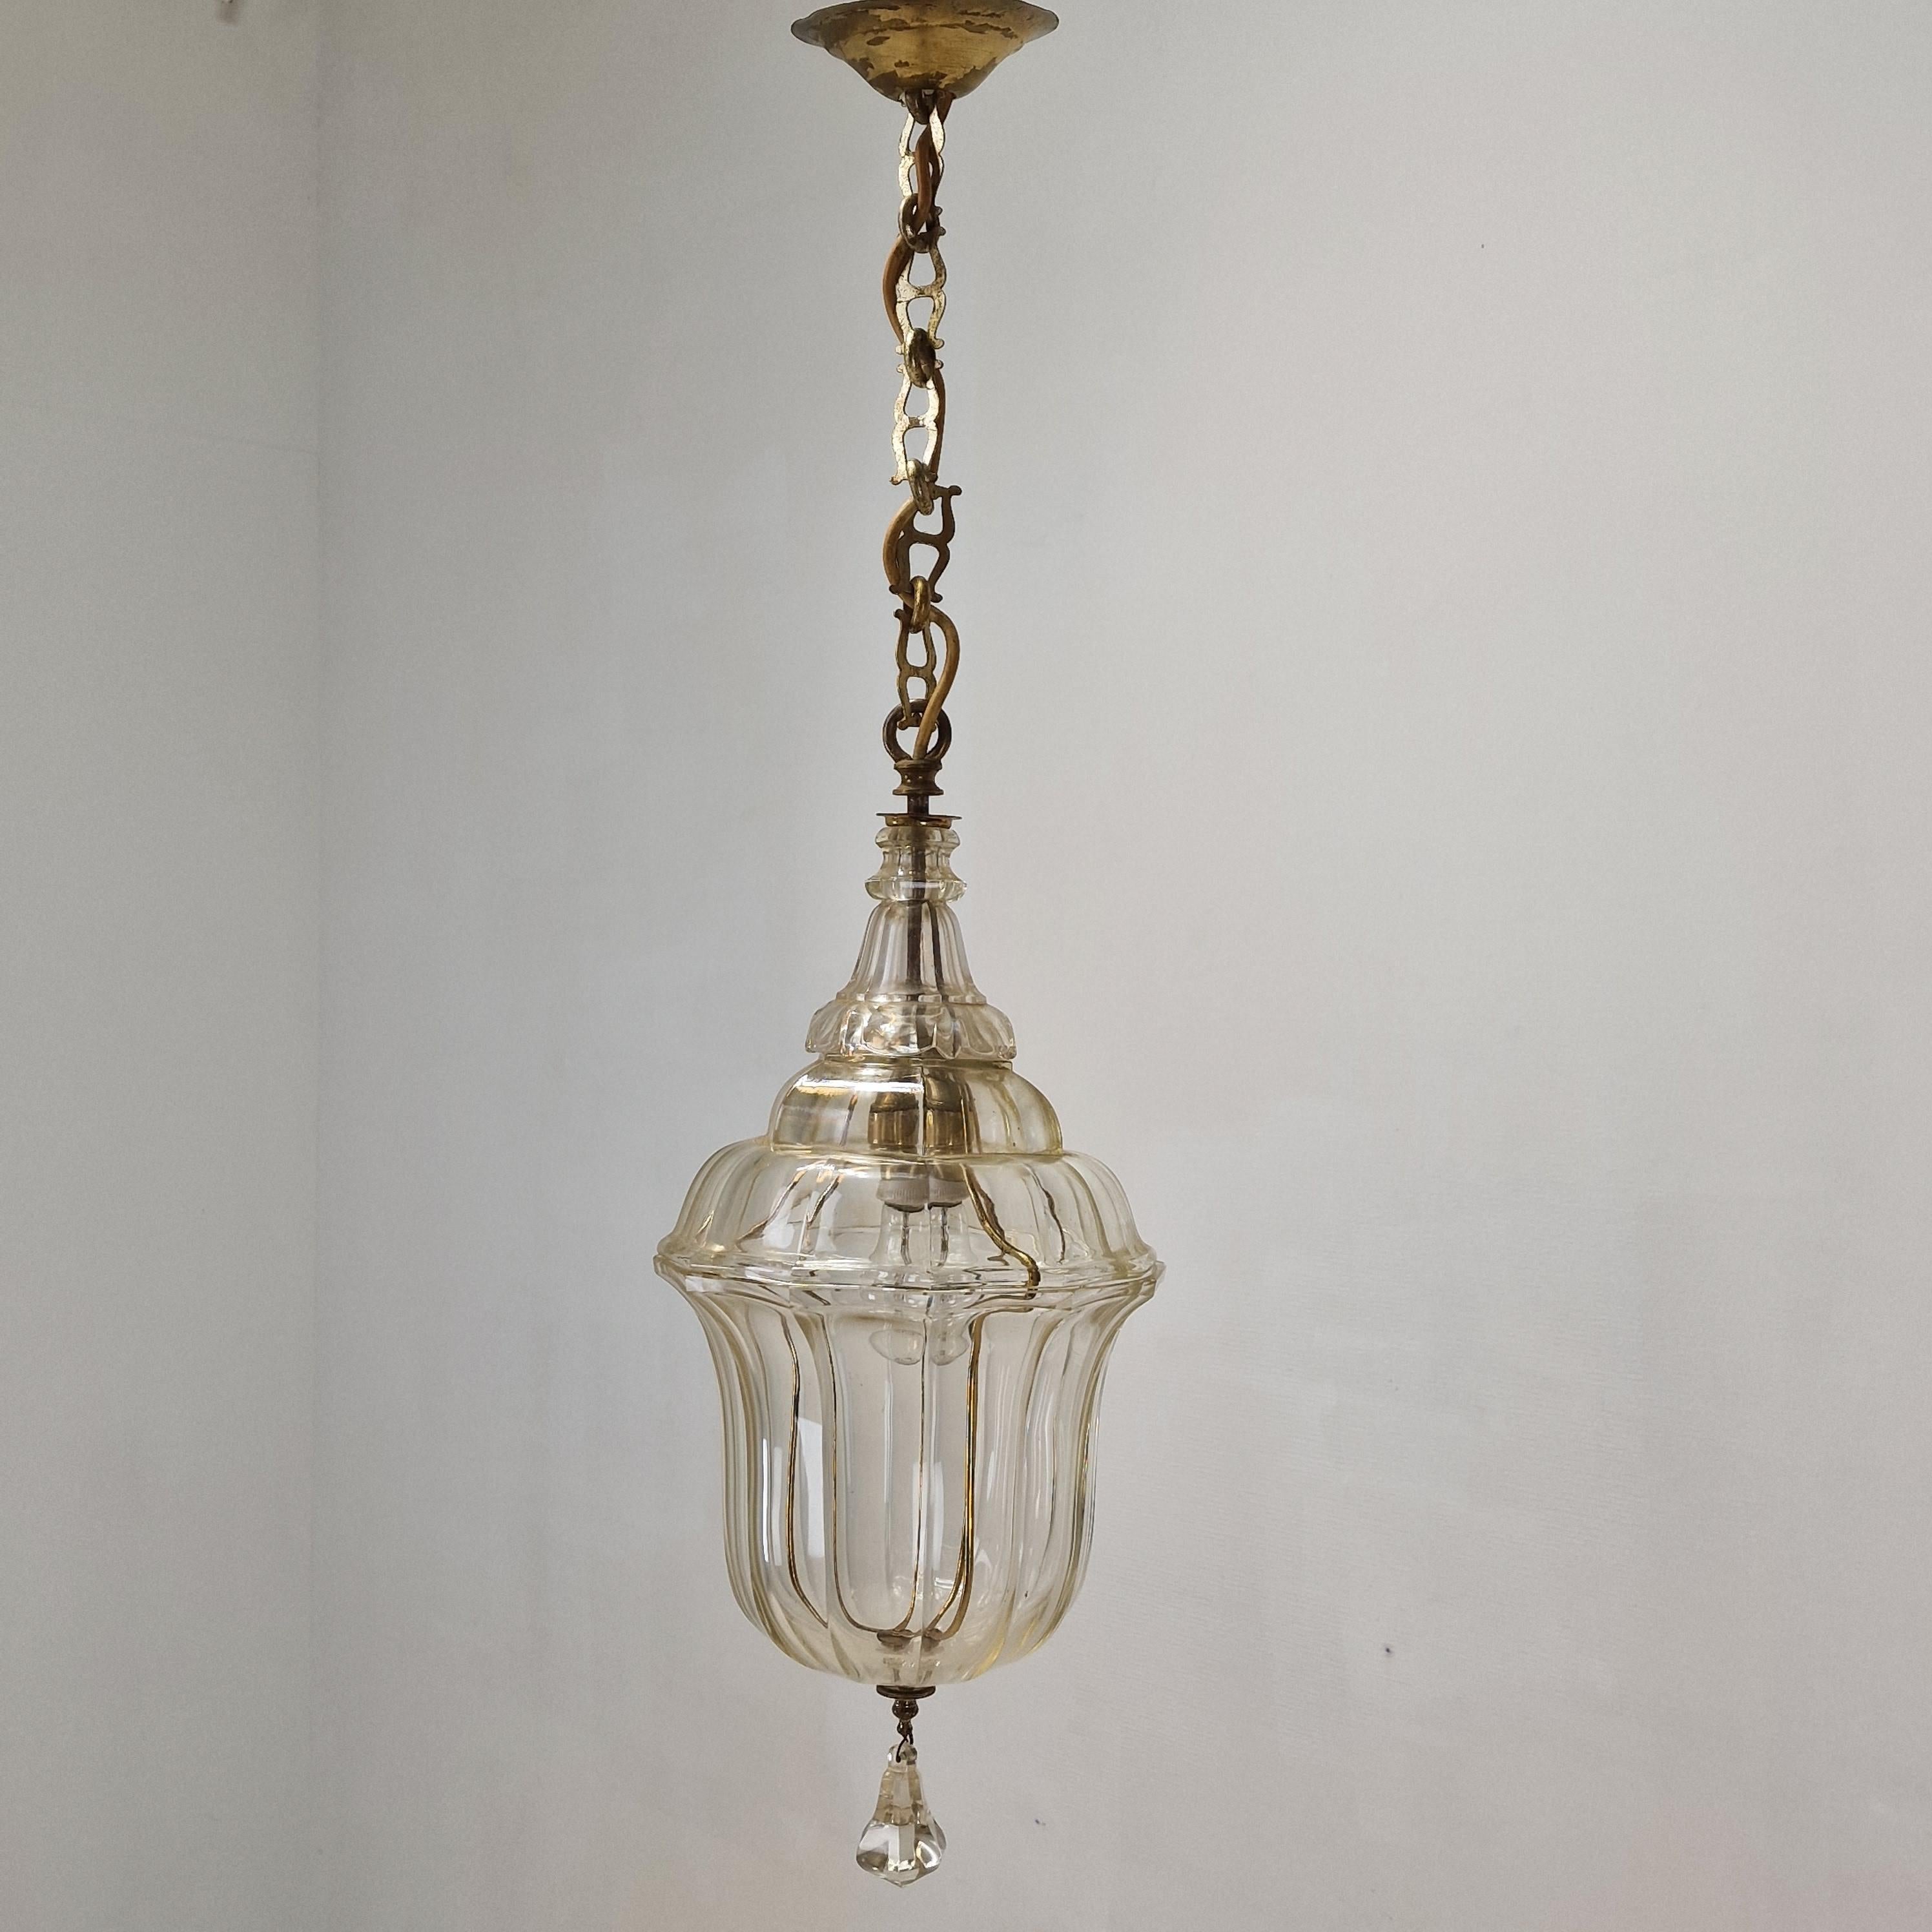 Hand-Crafted Italian Cut Crystal Hanging Lantern or Lamp, 1900 For Sale